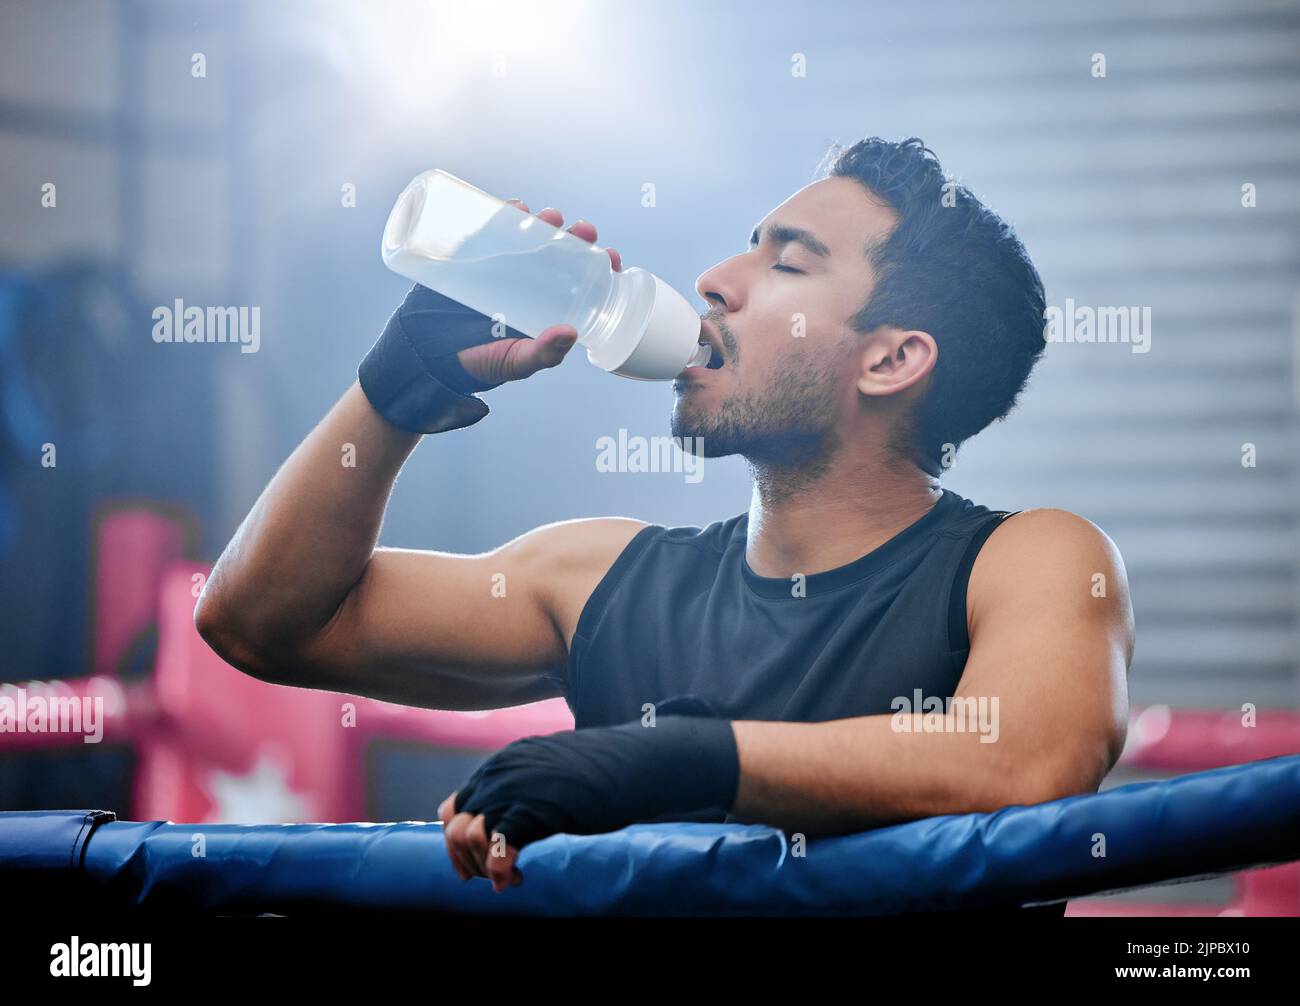 Fit, active and healthy boxer drinking water, on break and staying hydrated in routine workout, training or boxing ring exercise. Sporty, athletic or Stock Photo